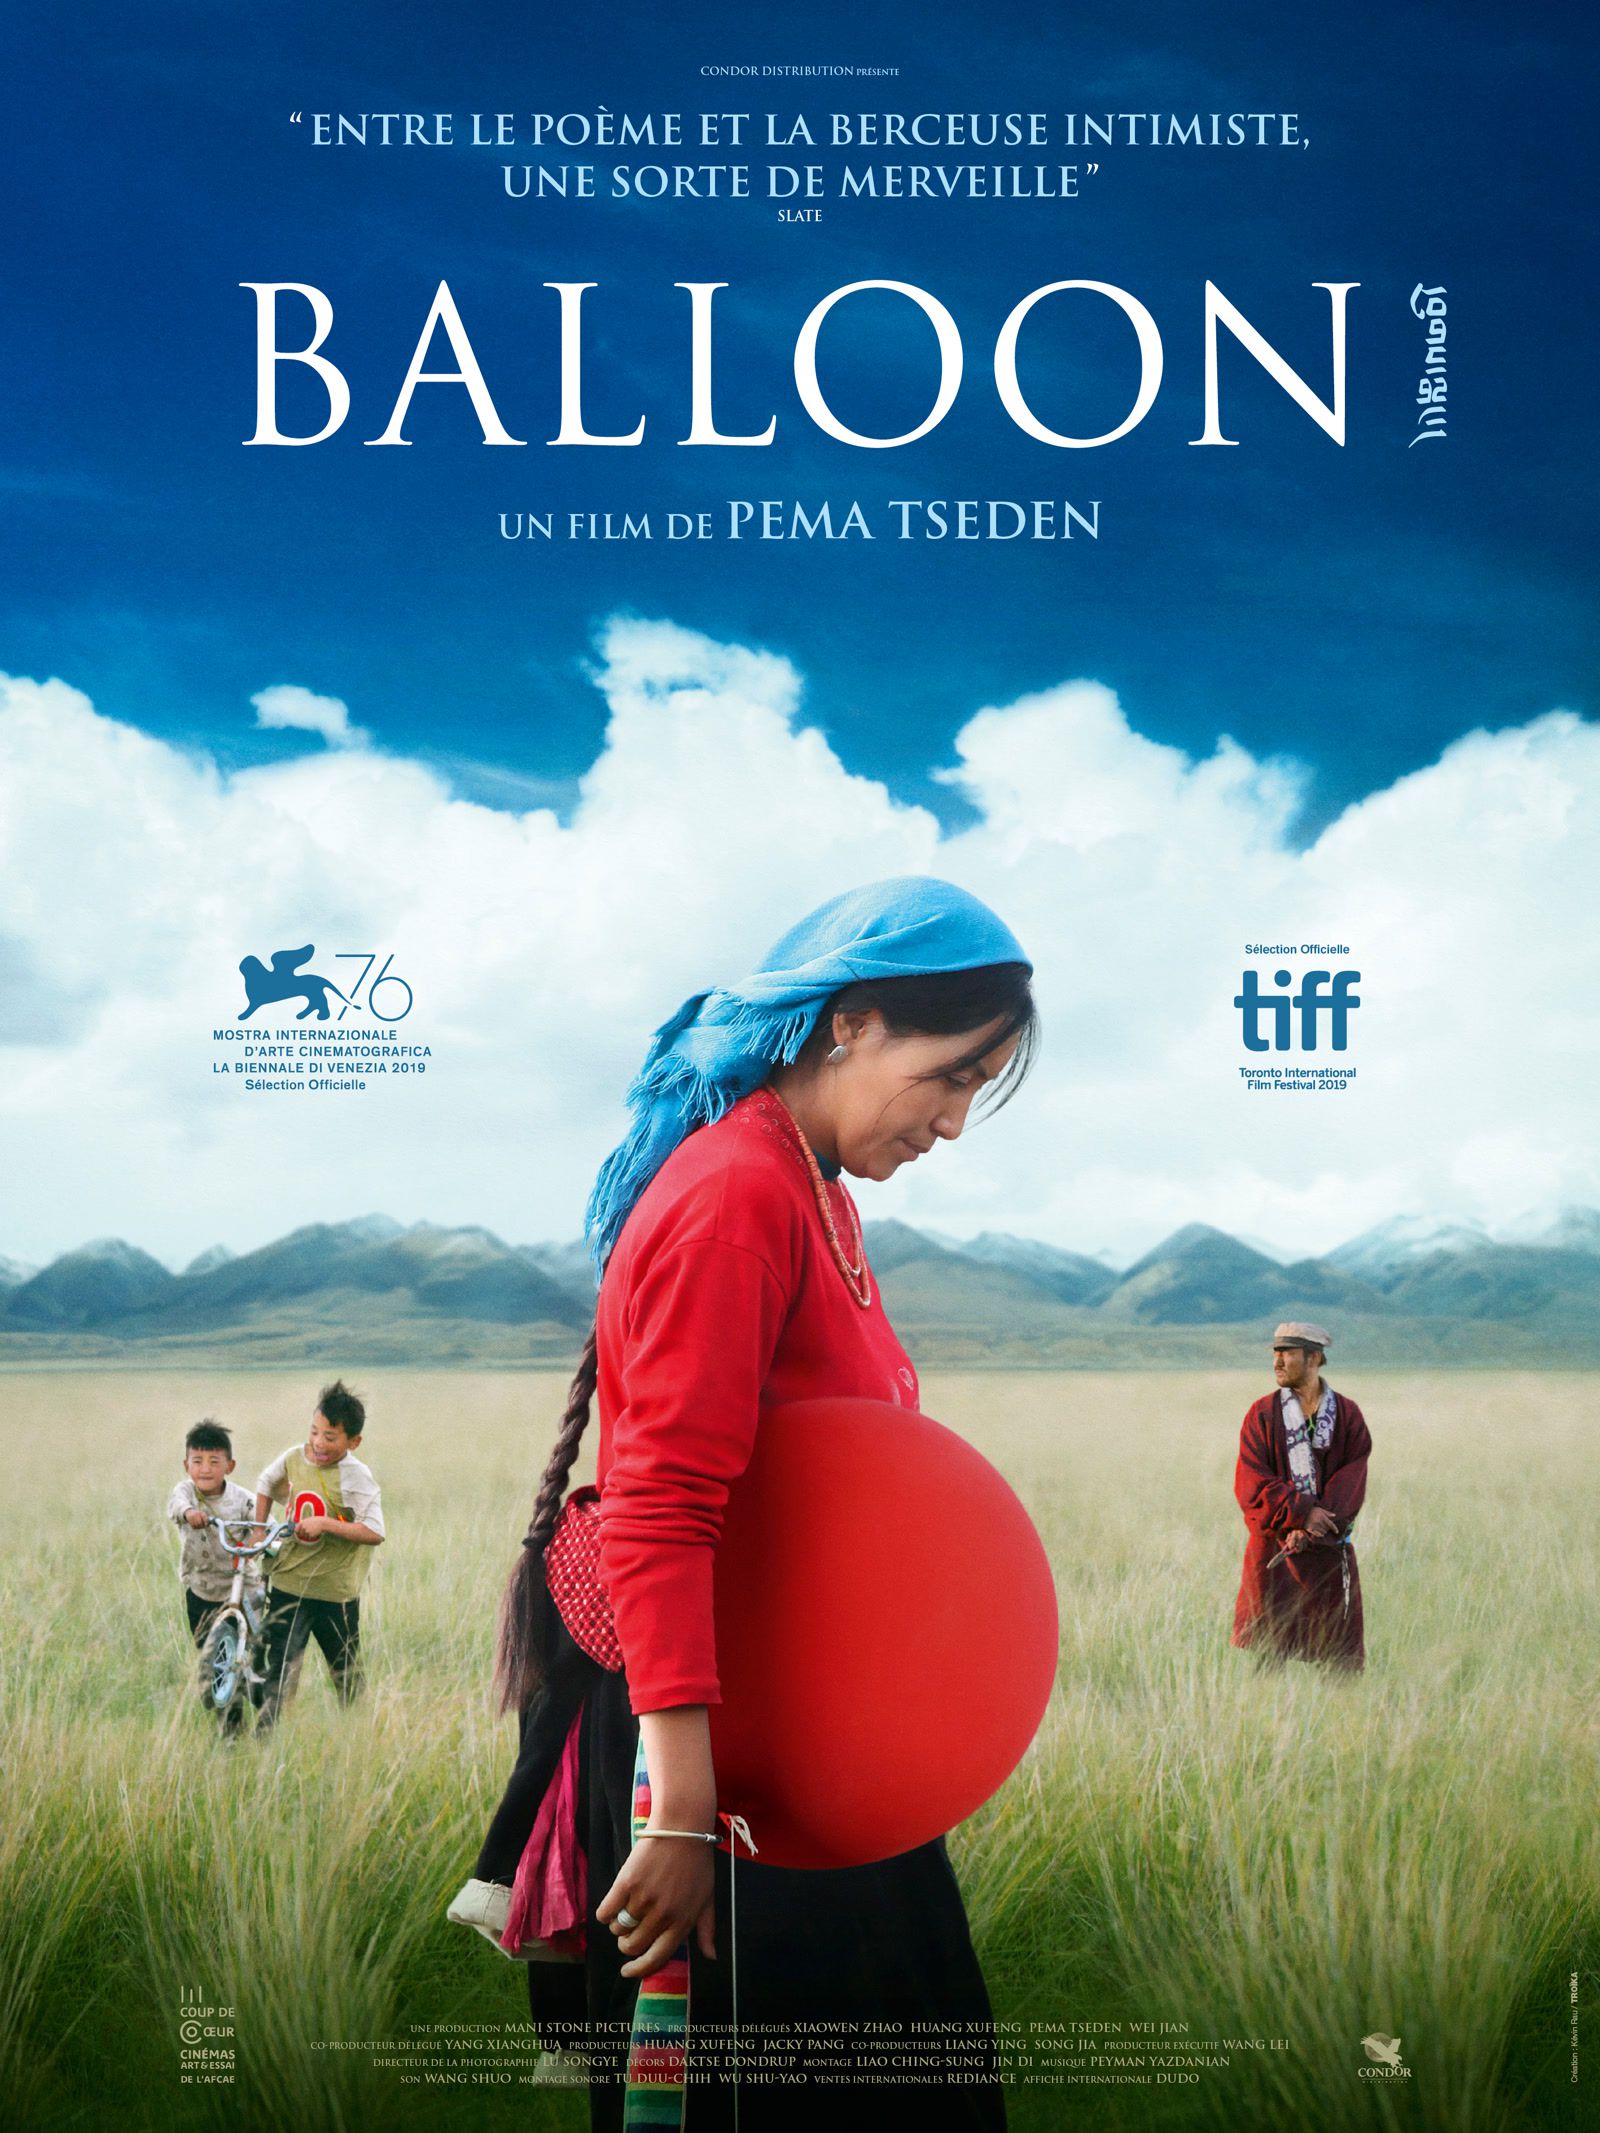 Balloon - Film (2020) streaming VF gratuit complet